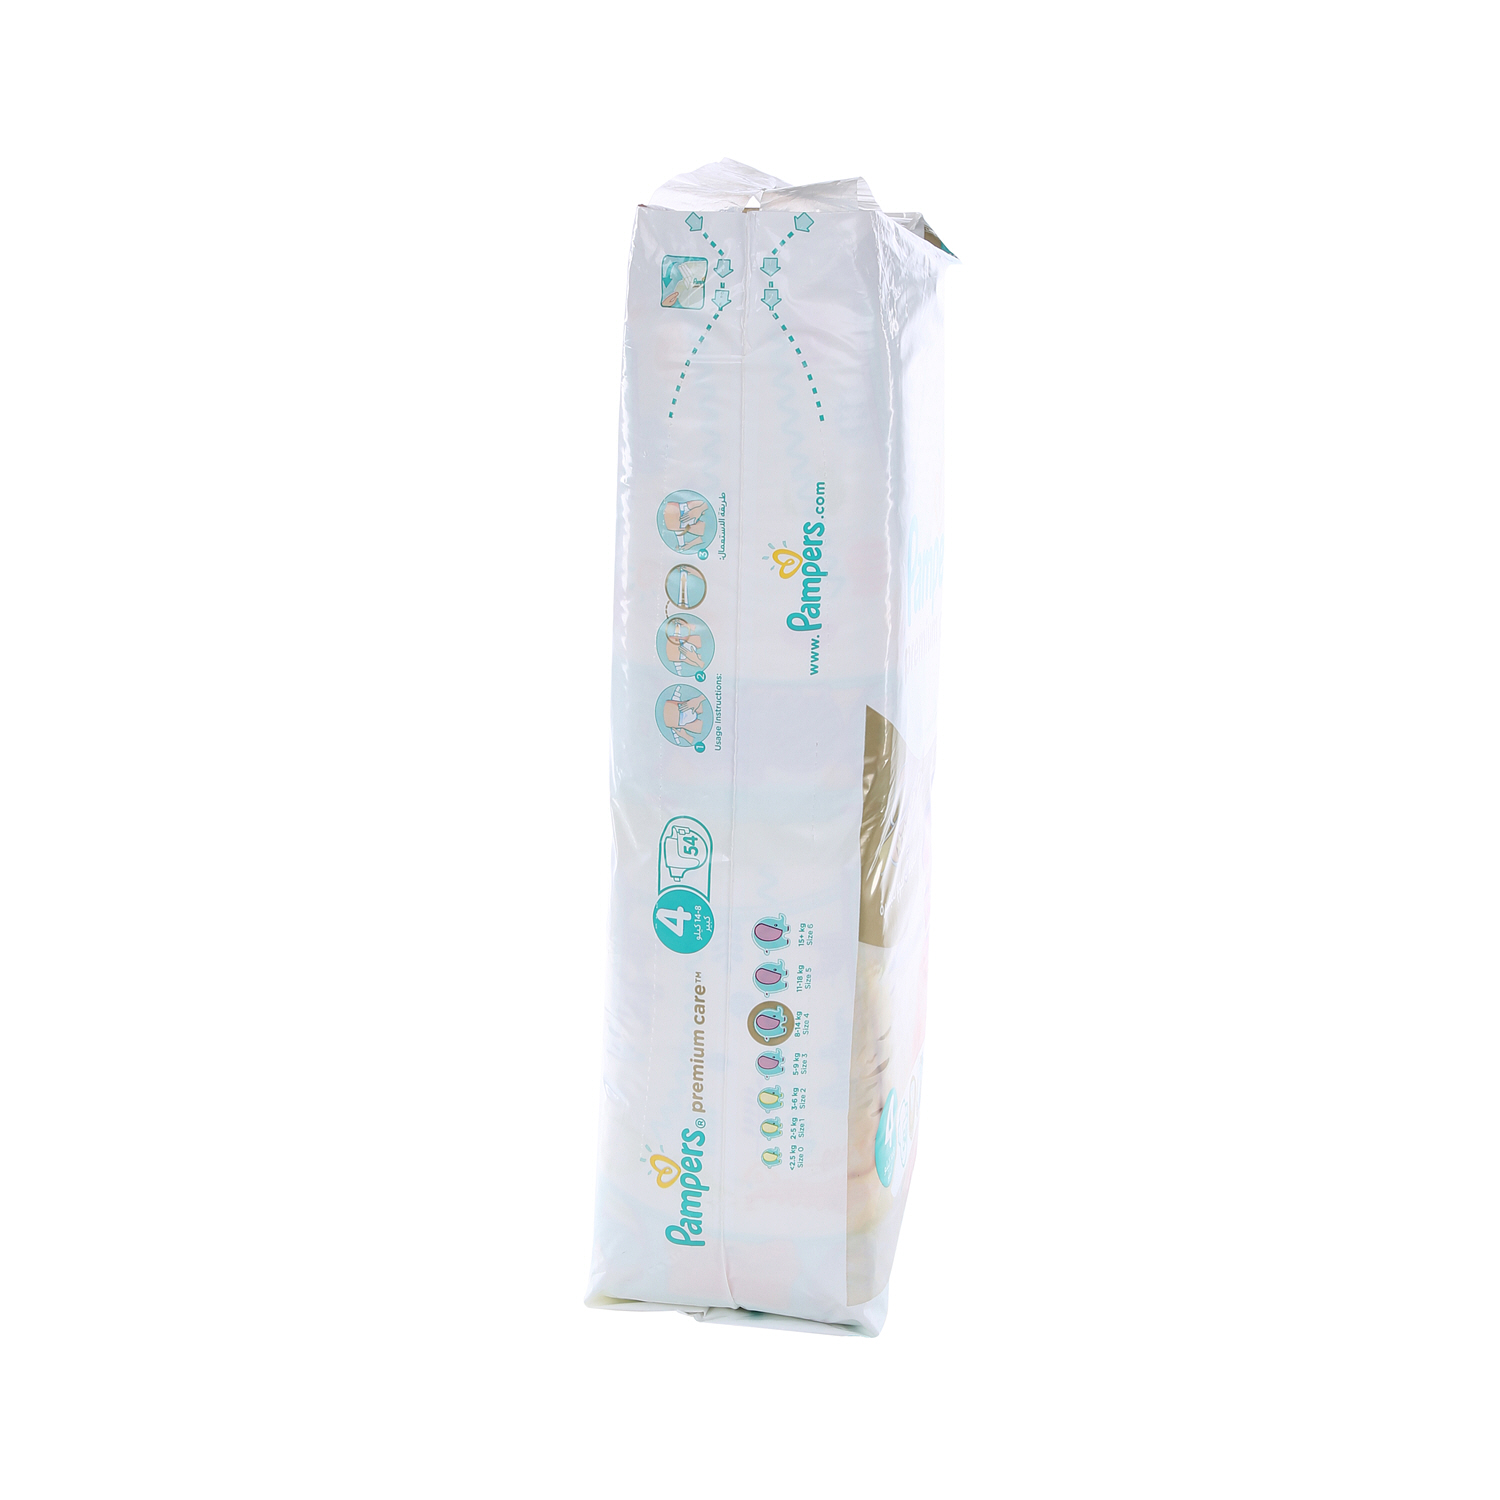 Pampers Premium Care Size 4 Pieces